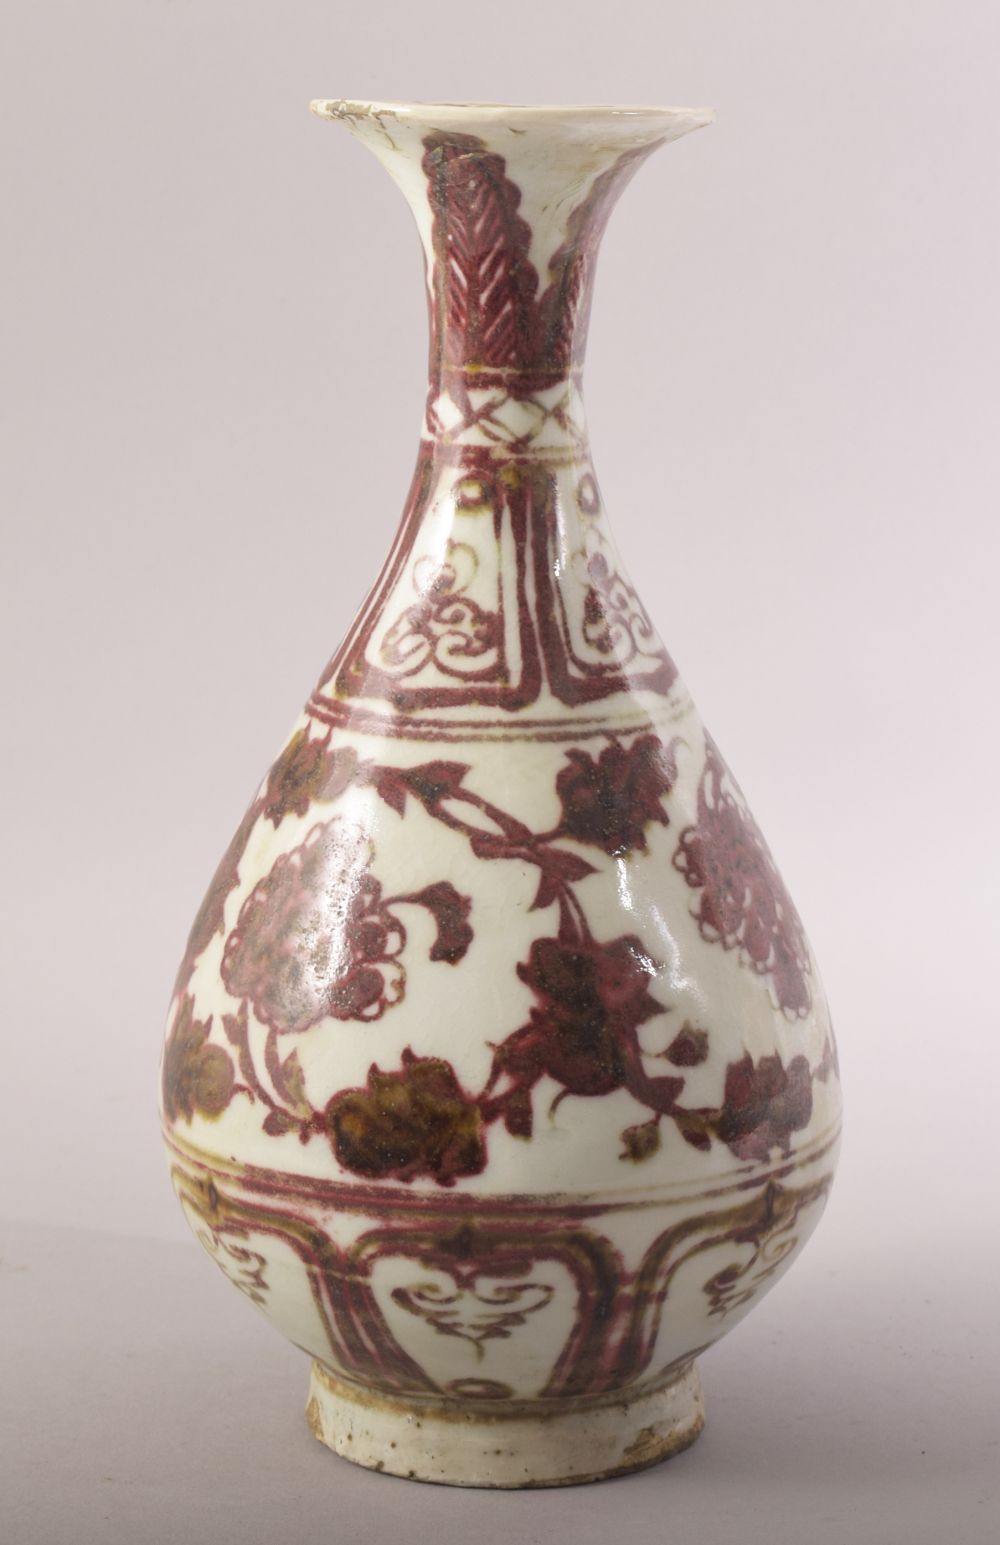 A CHINESE IRON RED AND WHITE GLAZED POTTERY VASE, decorated with floral motifs, 24.5cm high.